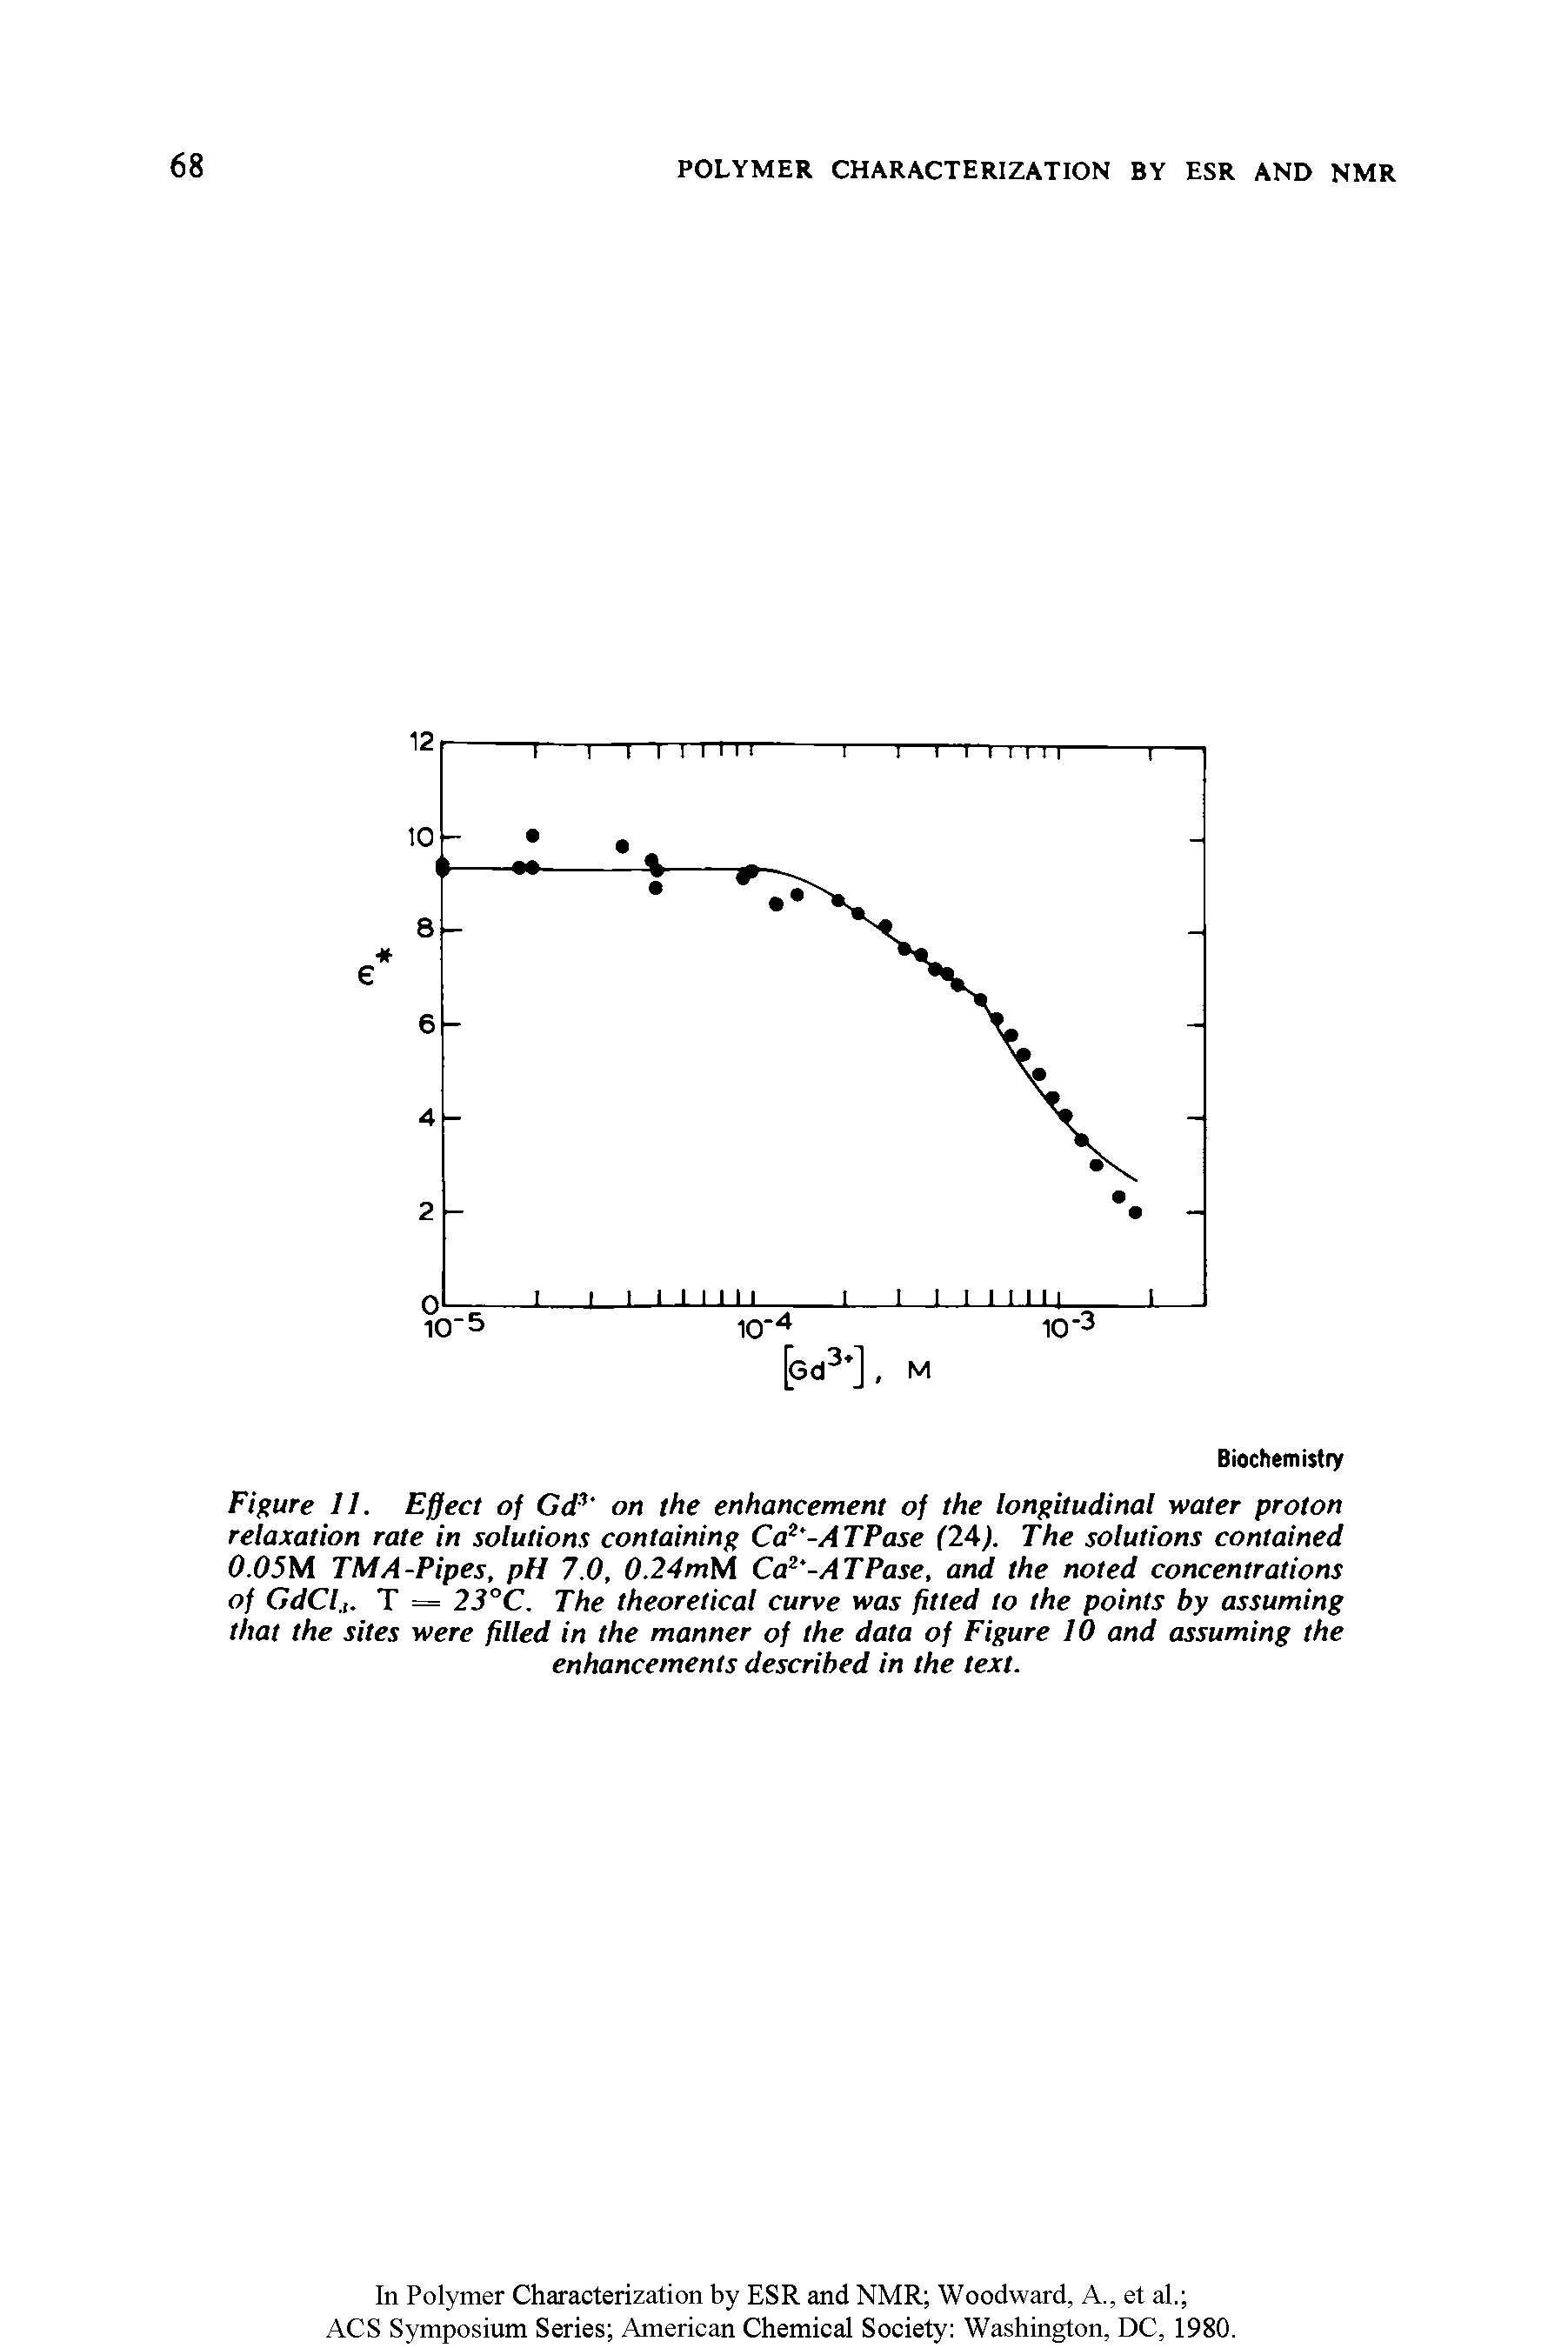 Figure 11. Effect of Gd3 on the enhancement of the longitudinal water proton relaxation rate in solutions containing Ca2 -ATPase (24). The solutions contained 0.05M TMA-Pipes, pH 7.0, 0.24mM Ca2 -ATPase, and the noted concentrations of GdCl.,. T = 23°C. The theoretical curve was fitted to the points by assuming that the sites were filled in the manner of the data of Figure 10 and assuming the enhancements described in the text.